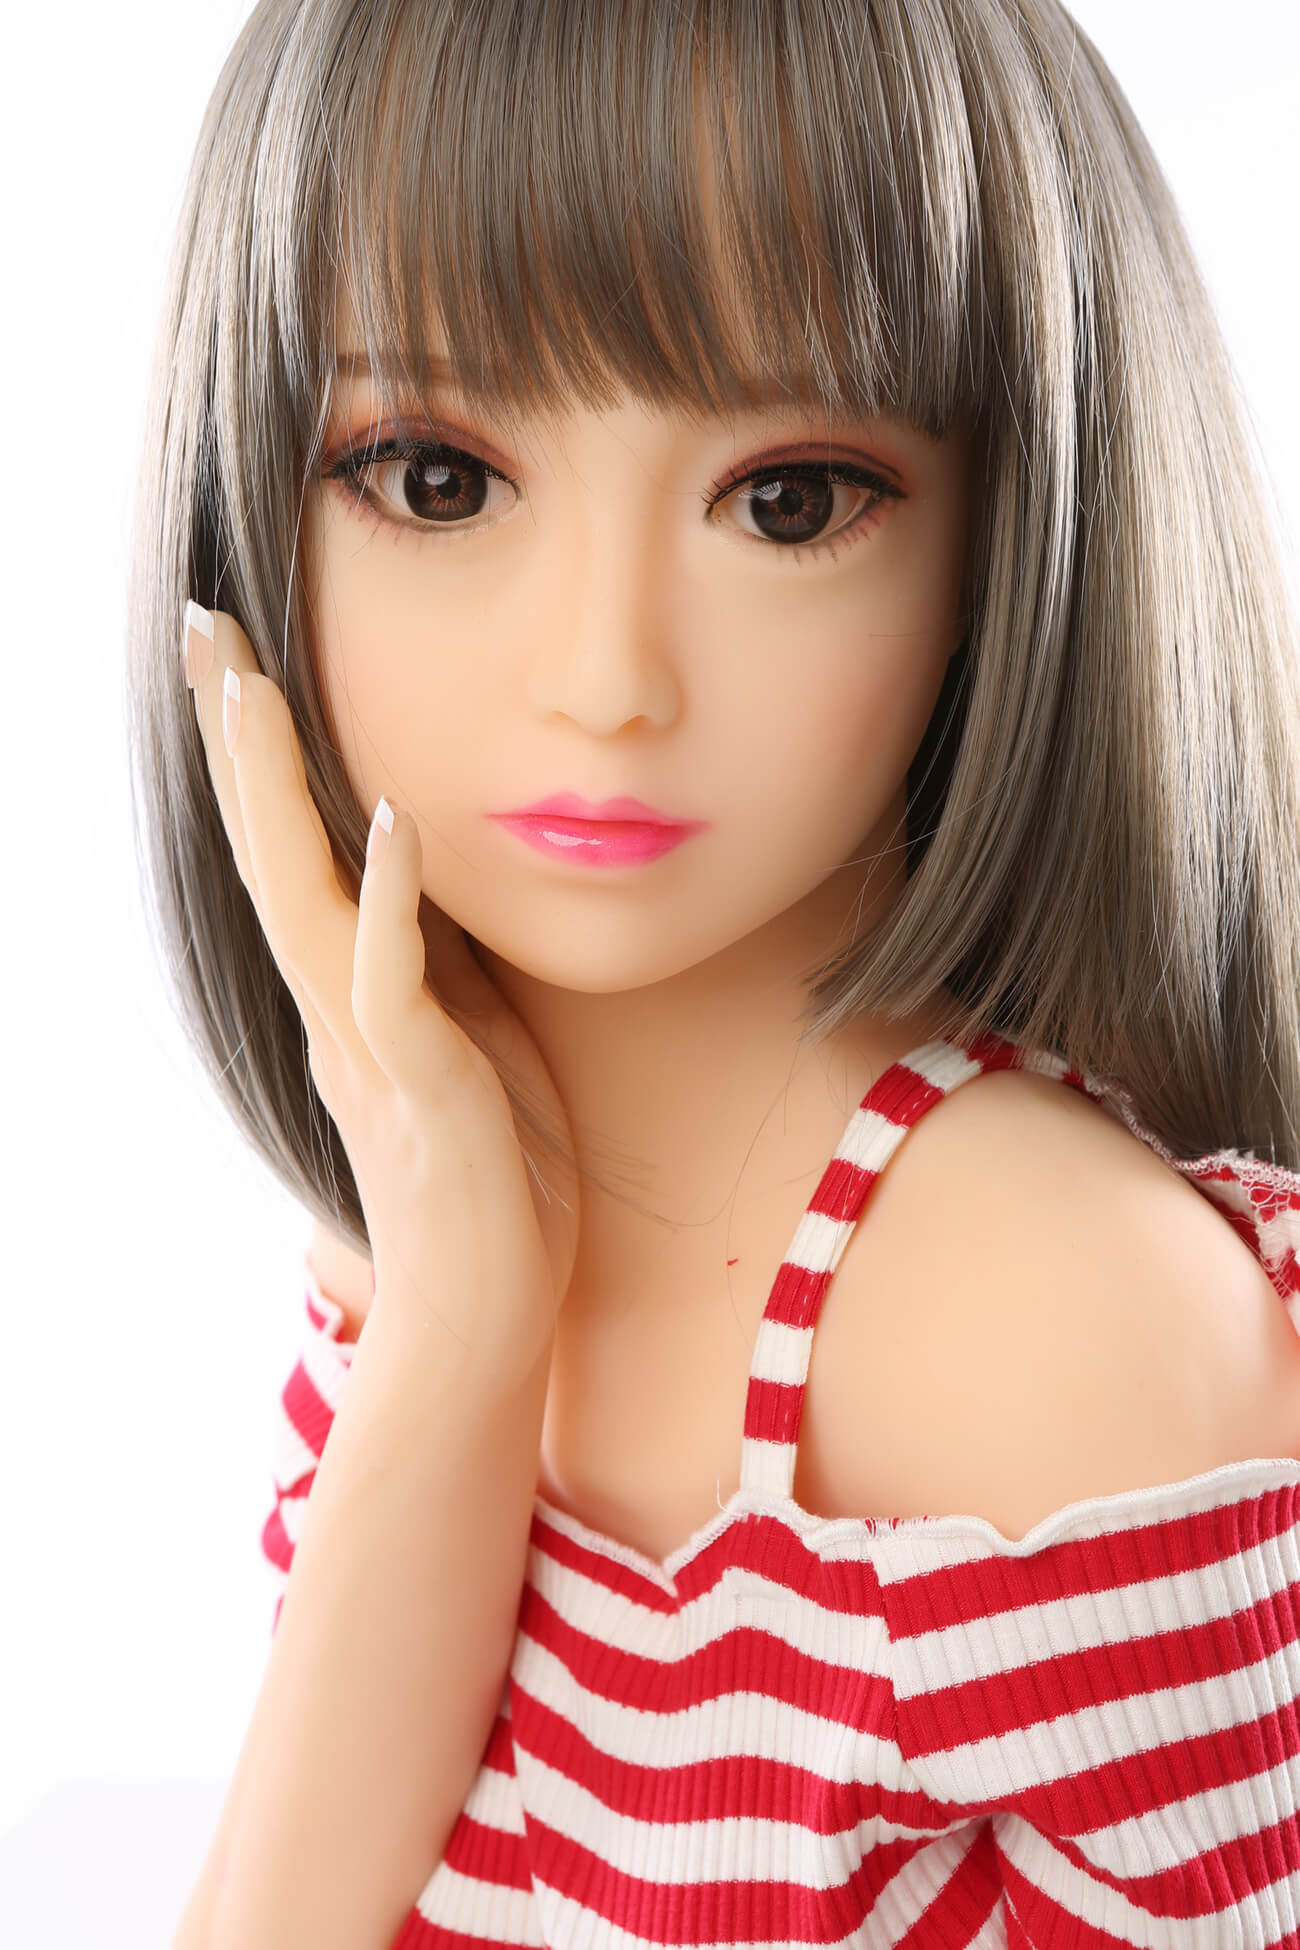 Best Cheap Love Doll - 125CM Teen TPE Solid Sex Doll Review.